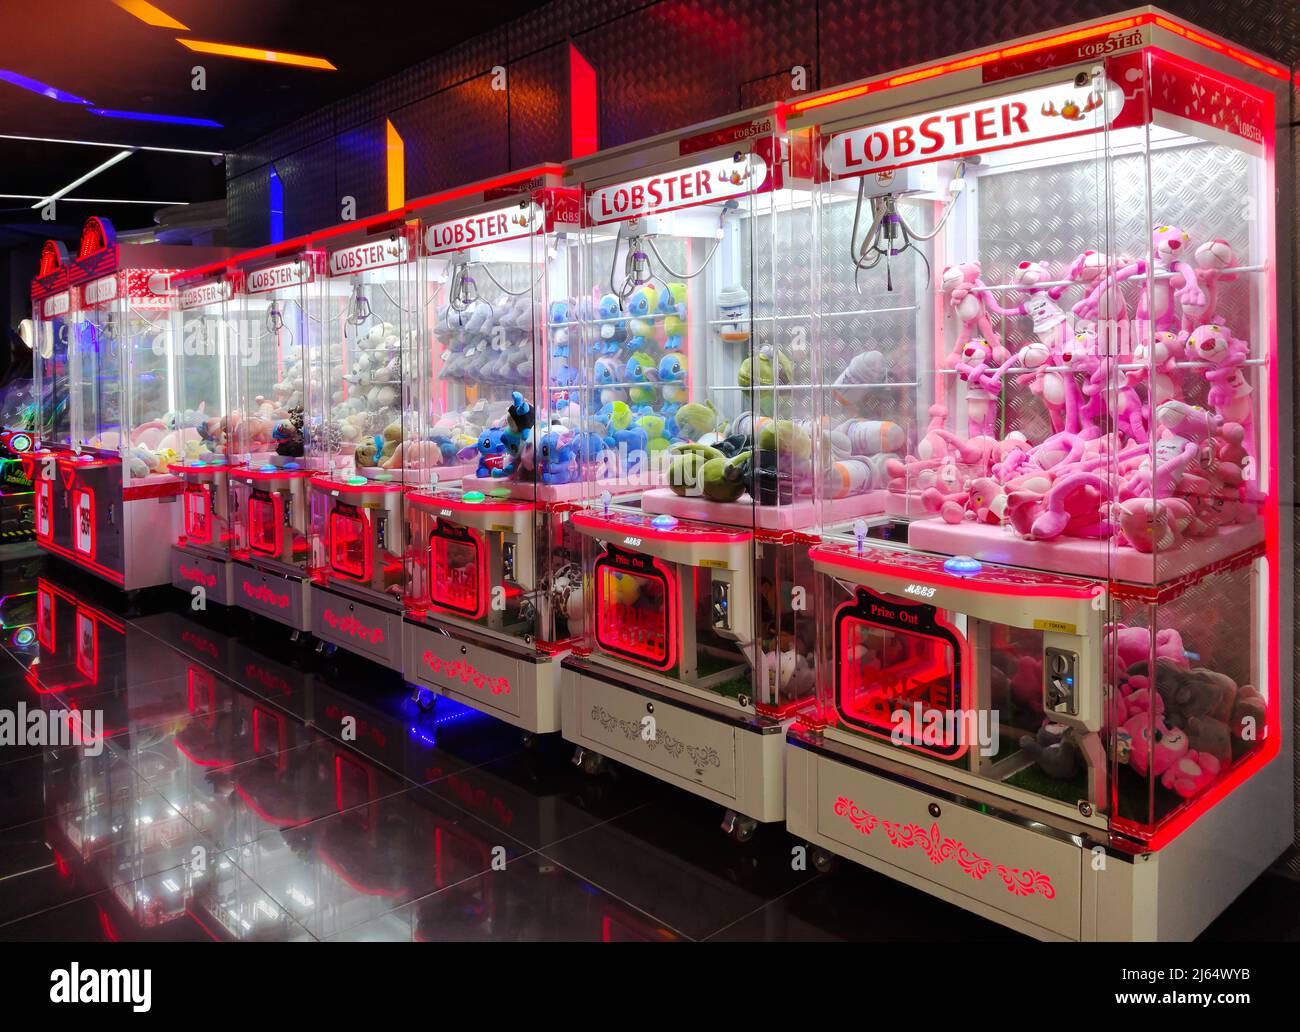 Kuala Lumpur,Malaysia - April 25,2022 : Colorful arcade game toy claw crane machine where people can win toys and other prizes. Stock Photo